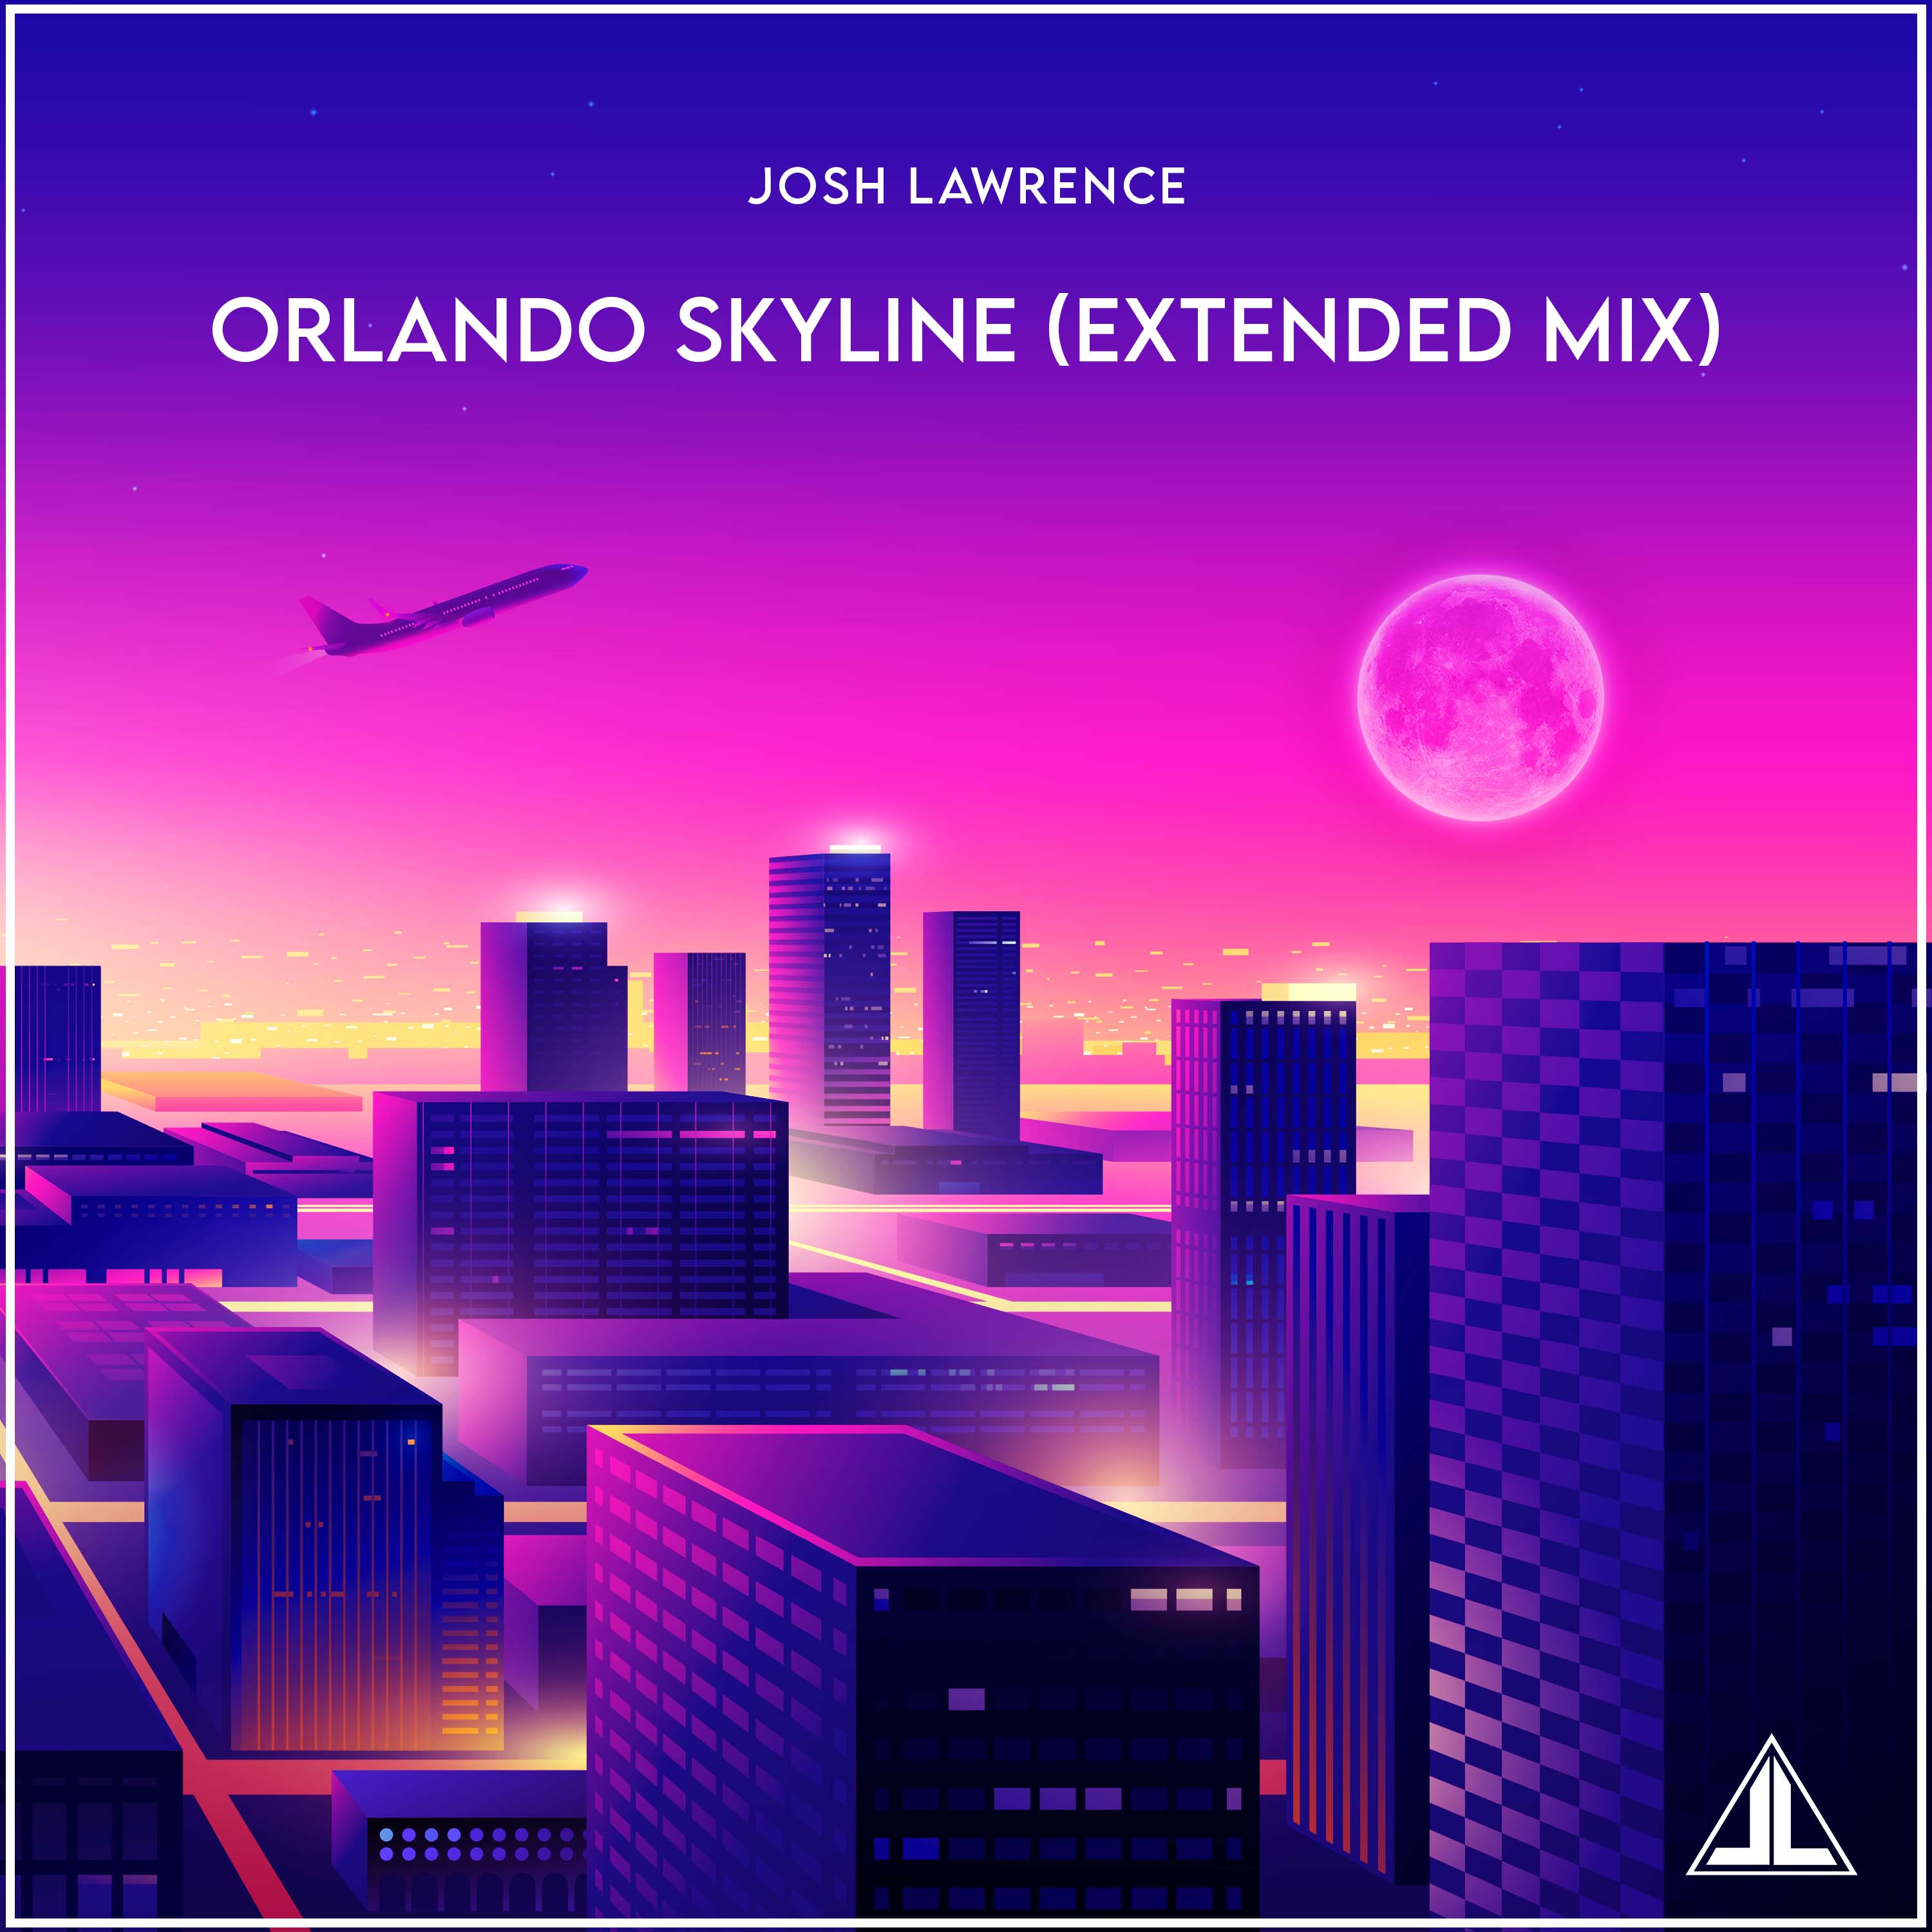 Album cover for 'Orlando Skyline,' a melodic and progressive house journey by Josh Lawrence, featuring artwork that echoes the vibrant and uplifting vibes inspired by the Orlando skyline.